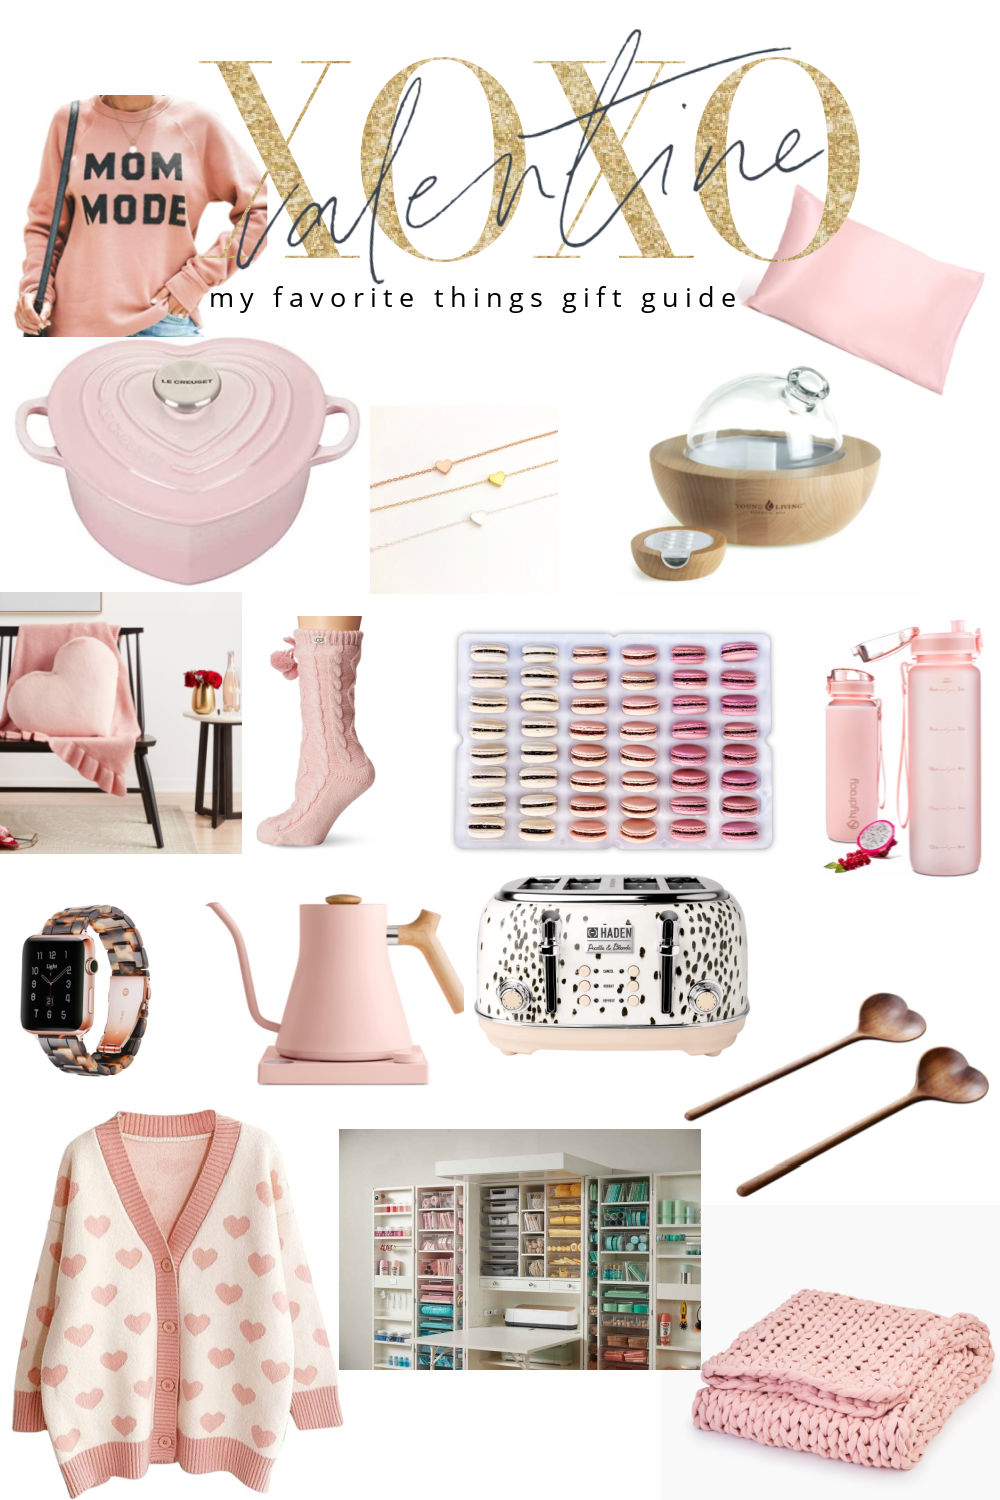 My Favorite Things Valentine Gift Guide! Some great gift ideas for anyone in your life and a great list to send to your husband!